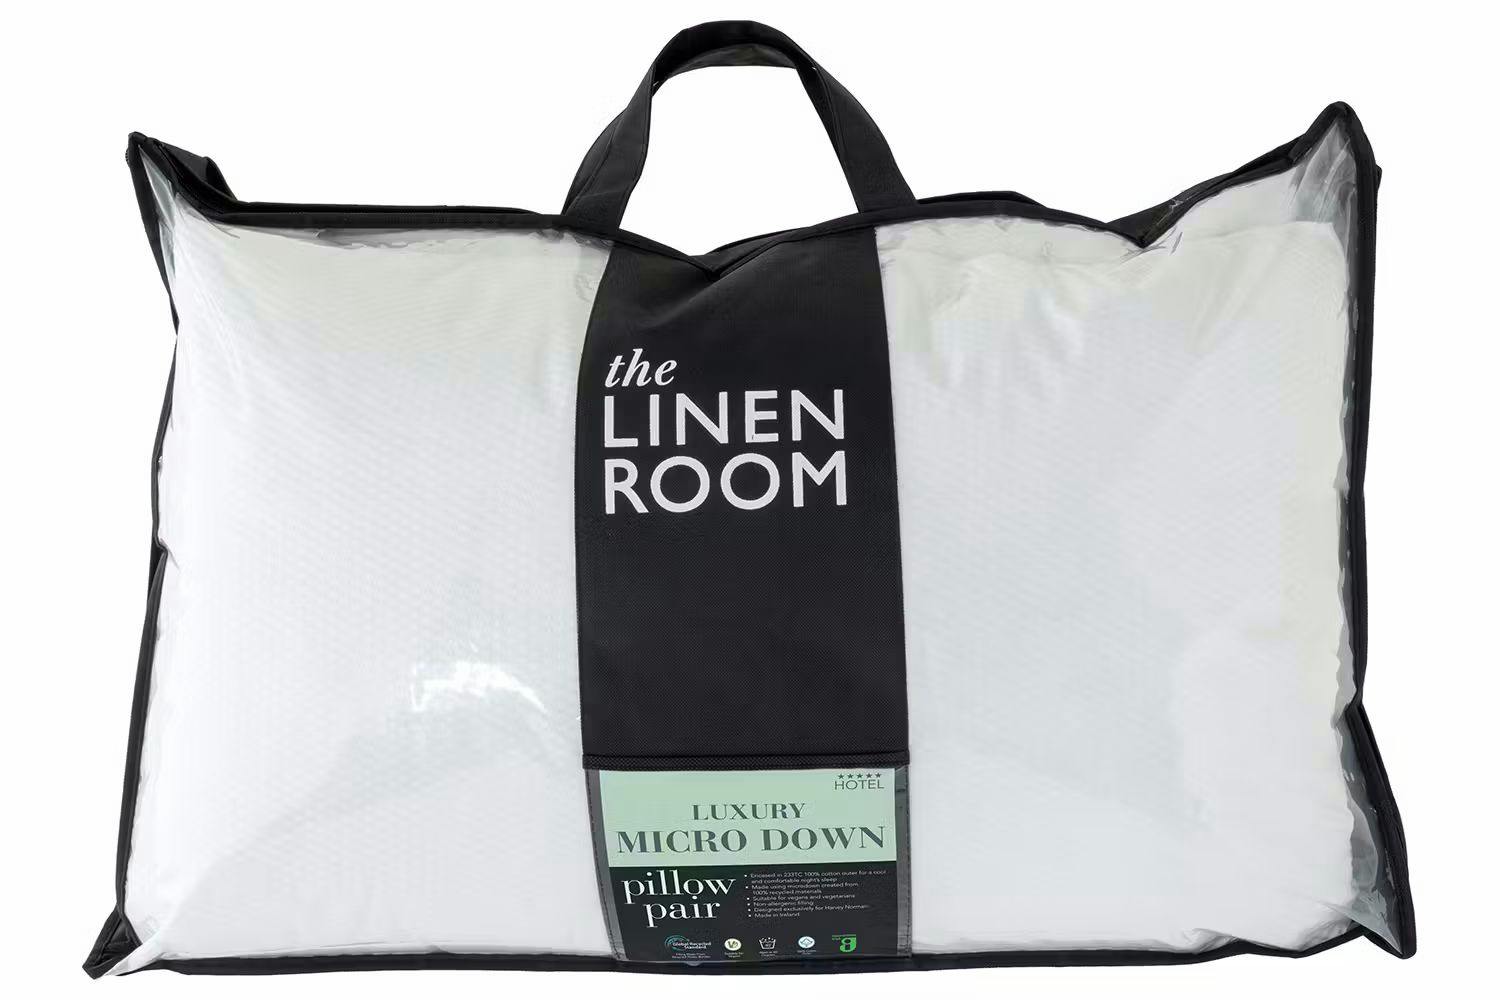 The Linen Room | Microdown Pillow Pair